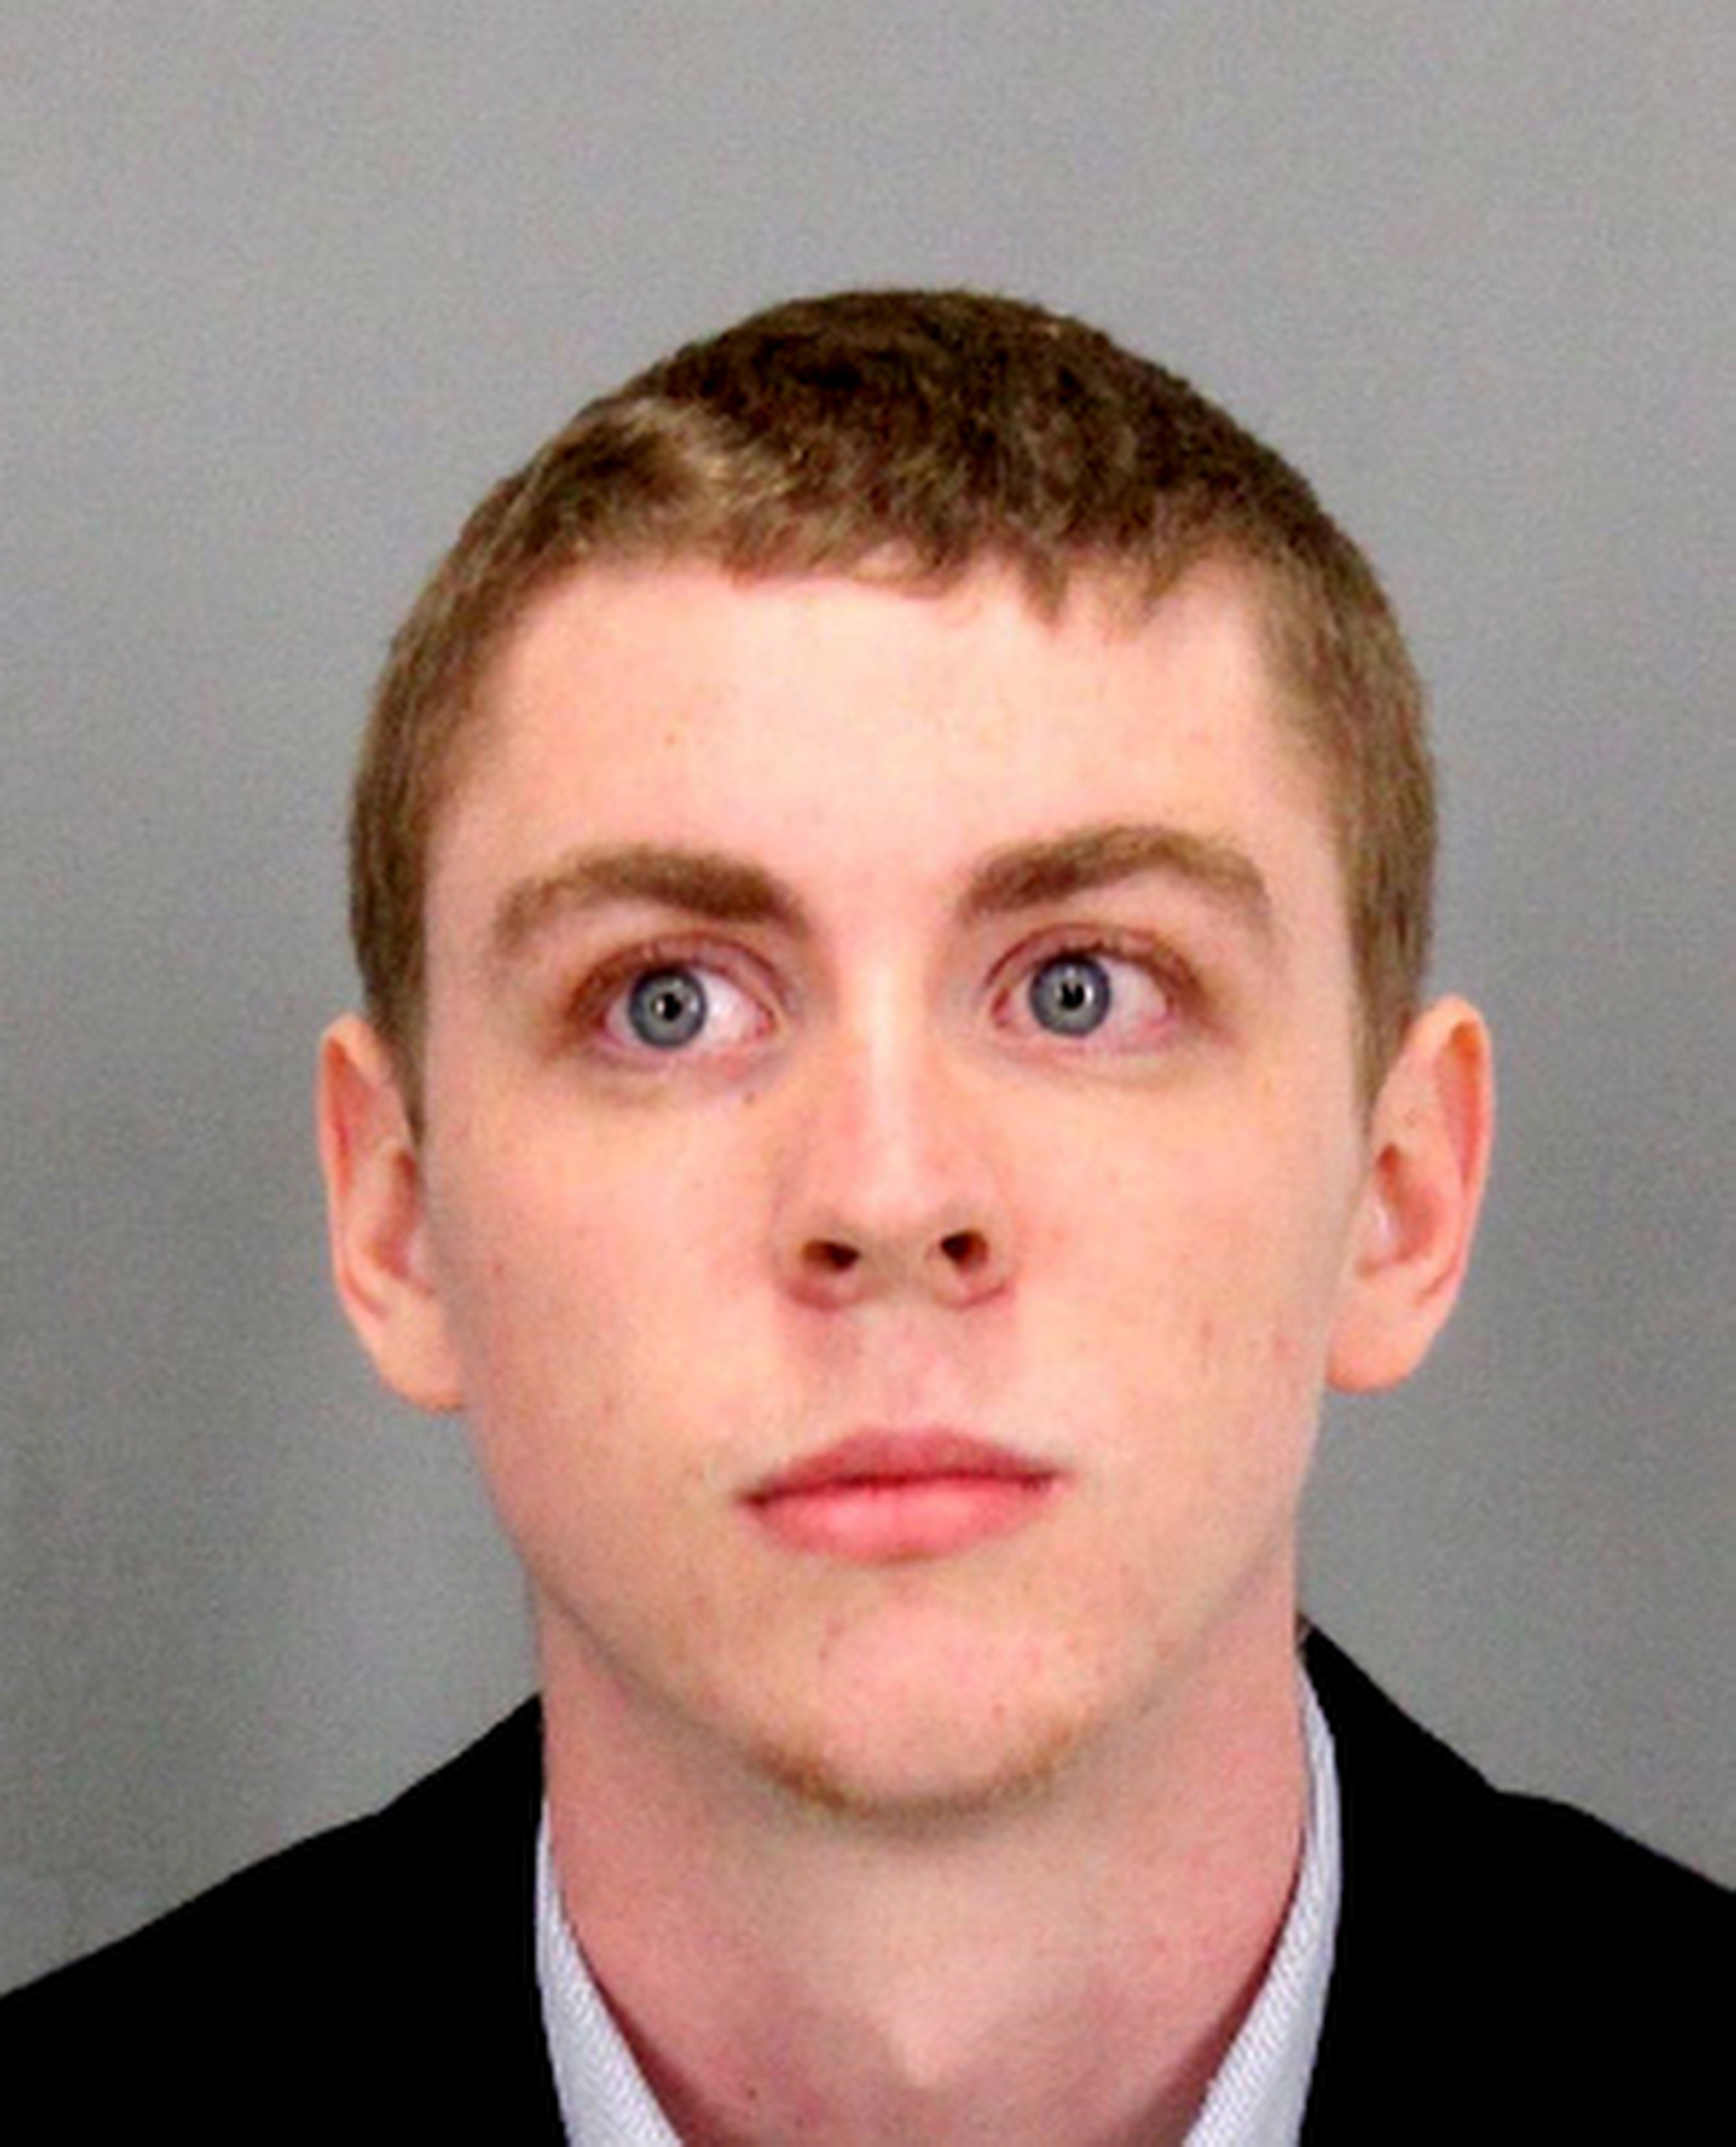 Brock Turner, a former Stanford University swimmer, who received six months in jail for sexually assaulting an unconscious woman, in an undated booking photo provided by Santa Clara County Sheriff (Santa Clara County Sheriff—AP)